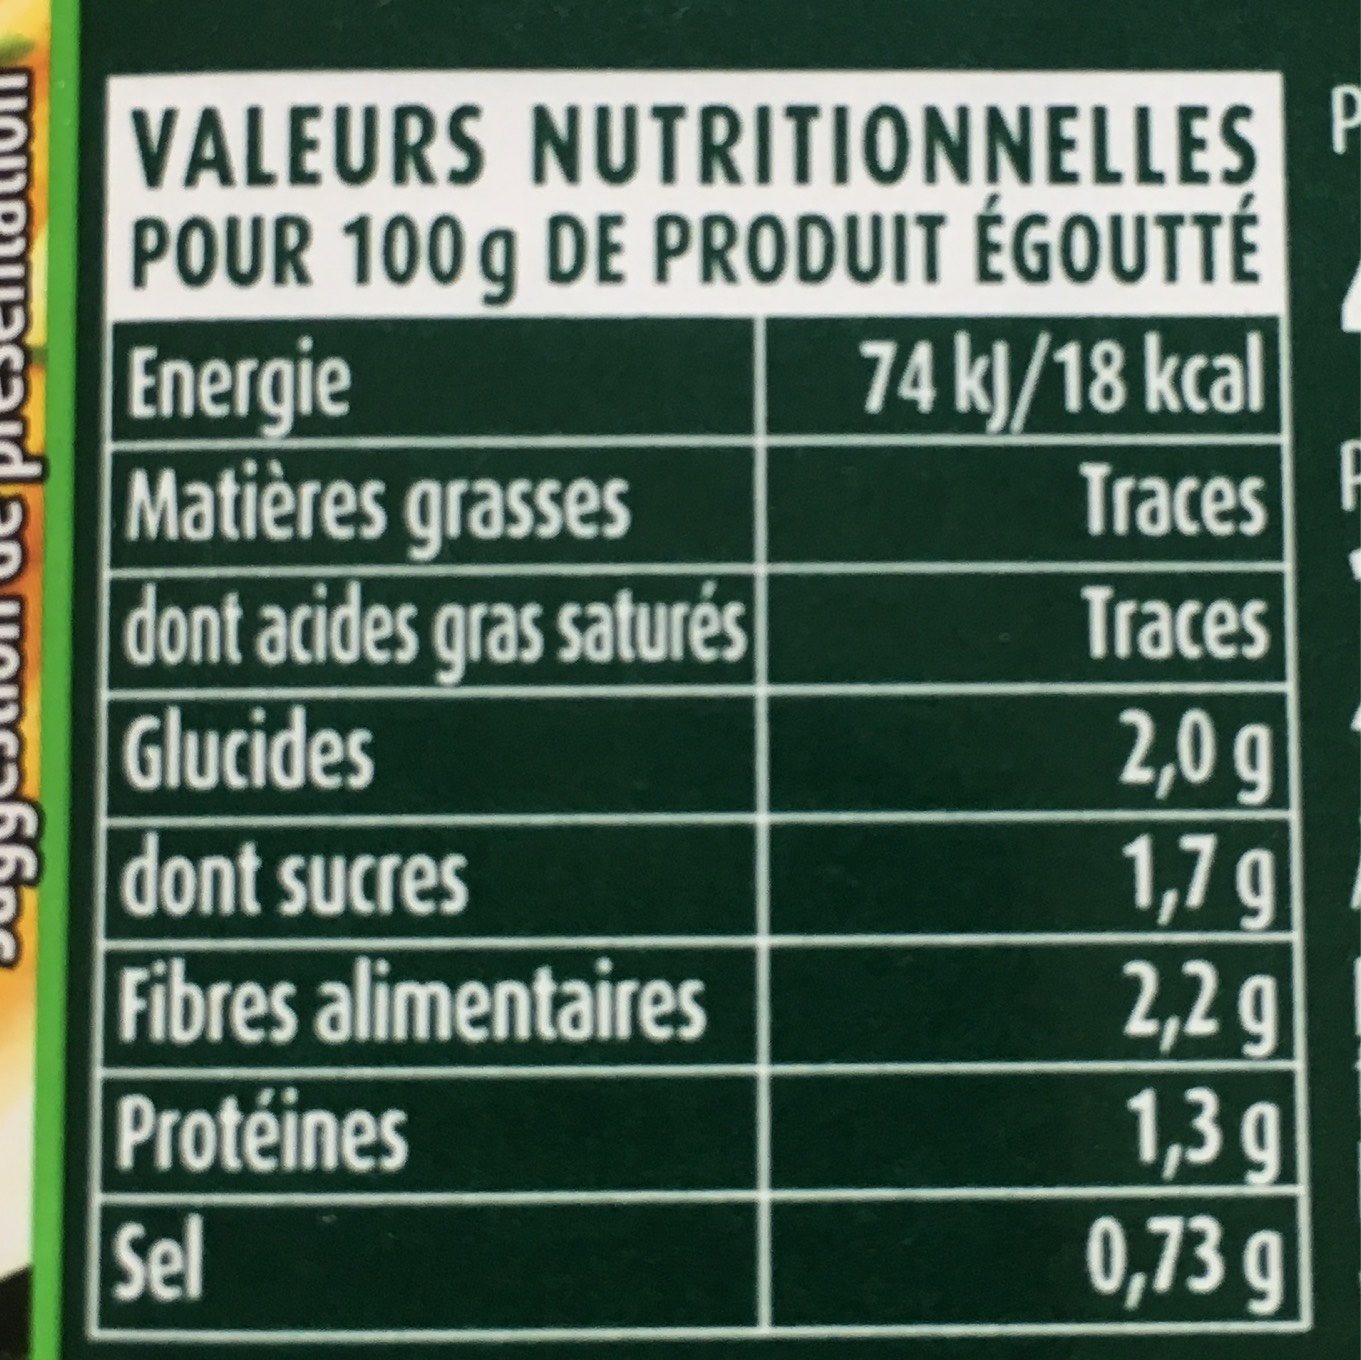 Haricots Beurre extra-fins - Tableau nutritionnel